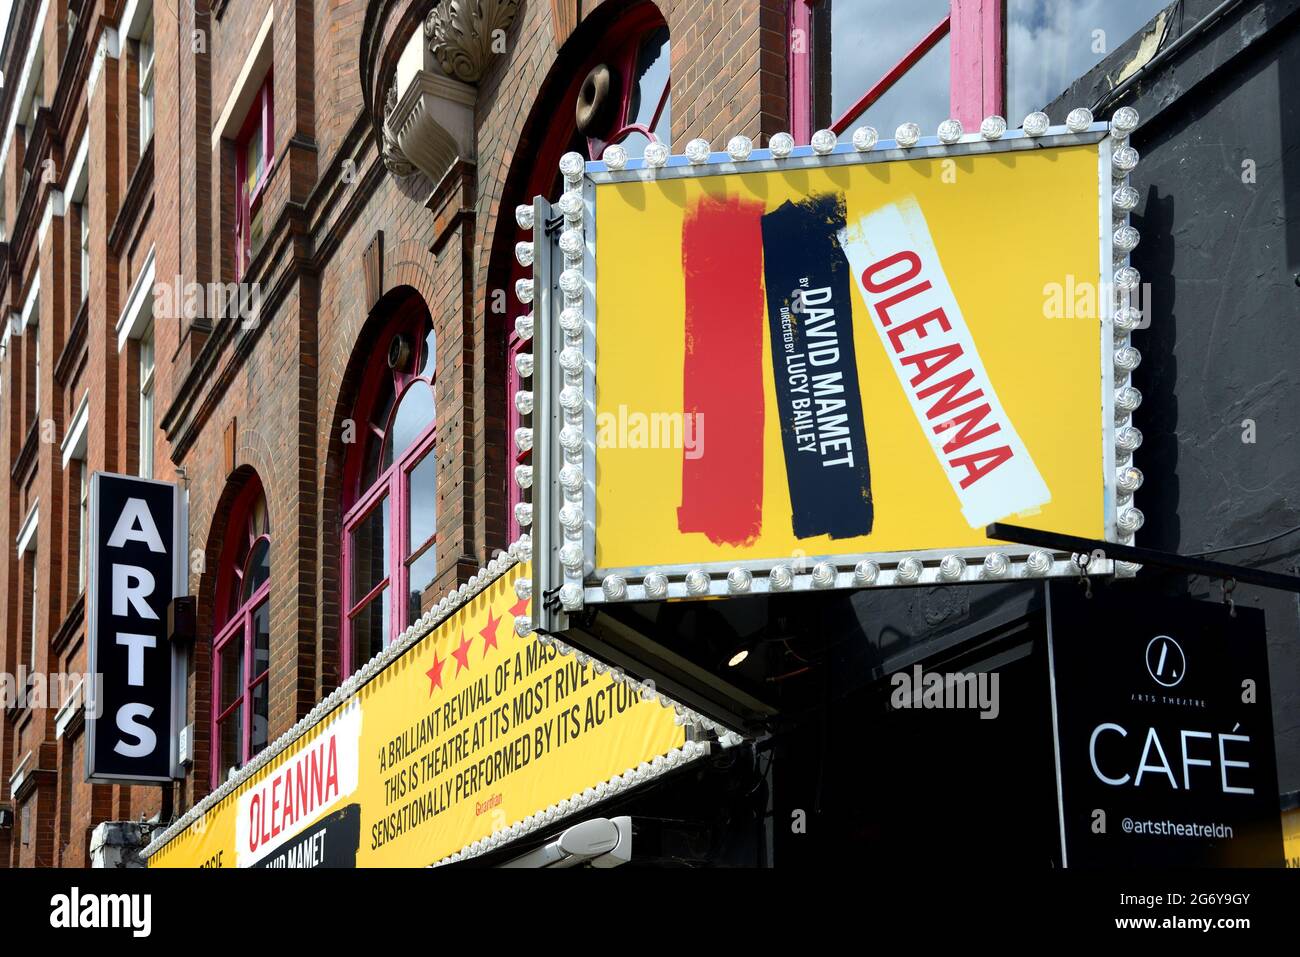 London, England, UK. 'Oleana' by David Mamet at the Arts Theatre, July 2021 Stock Photo